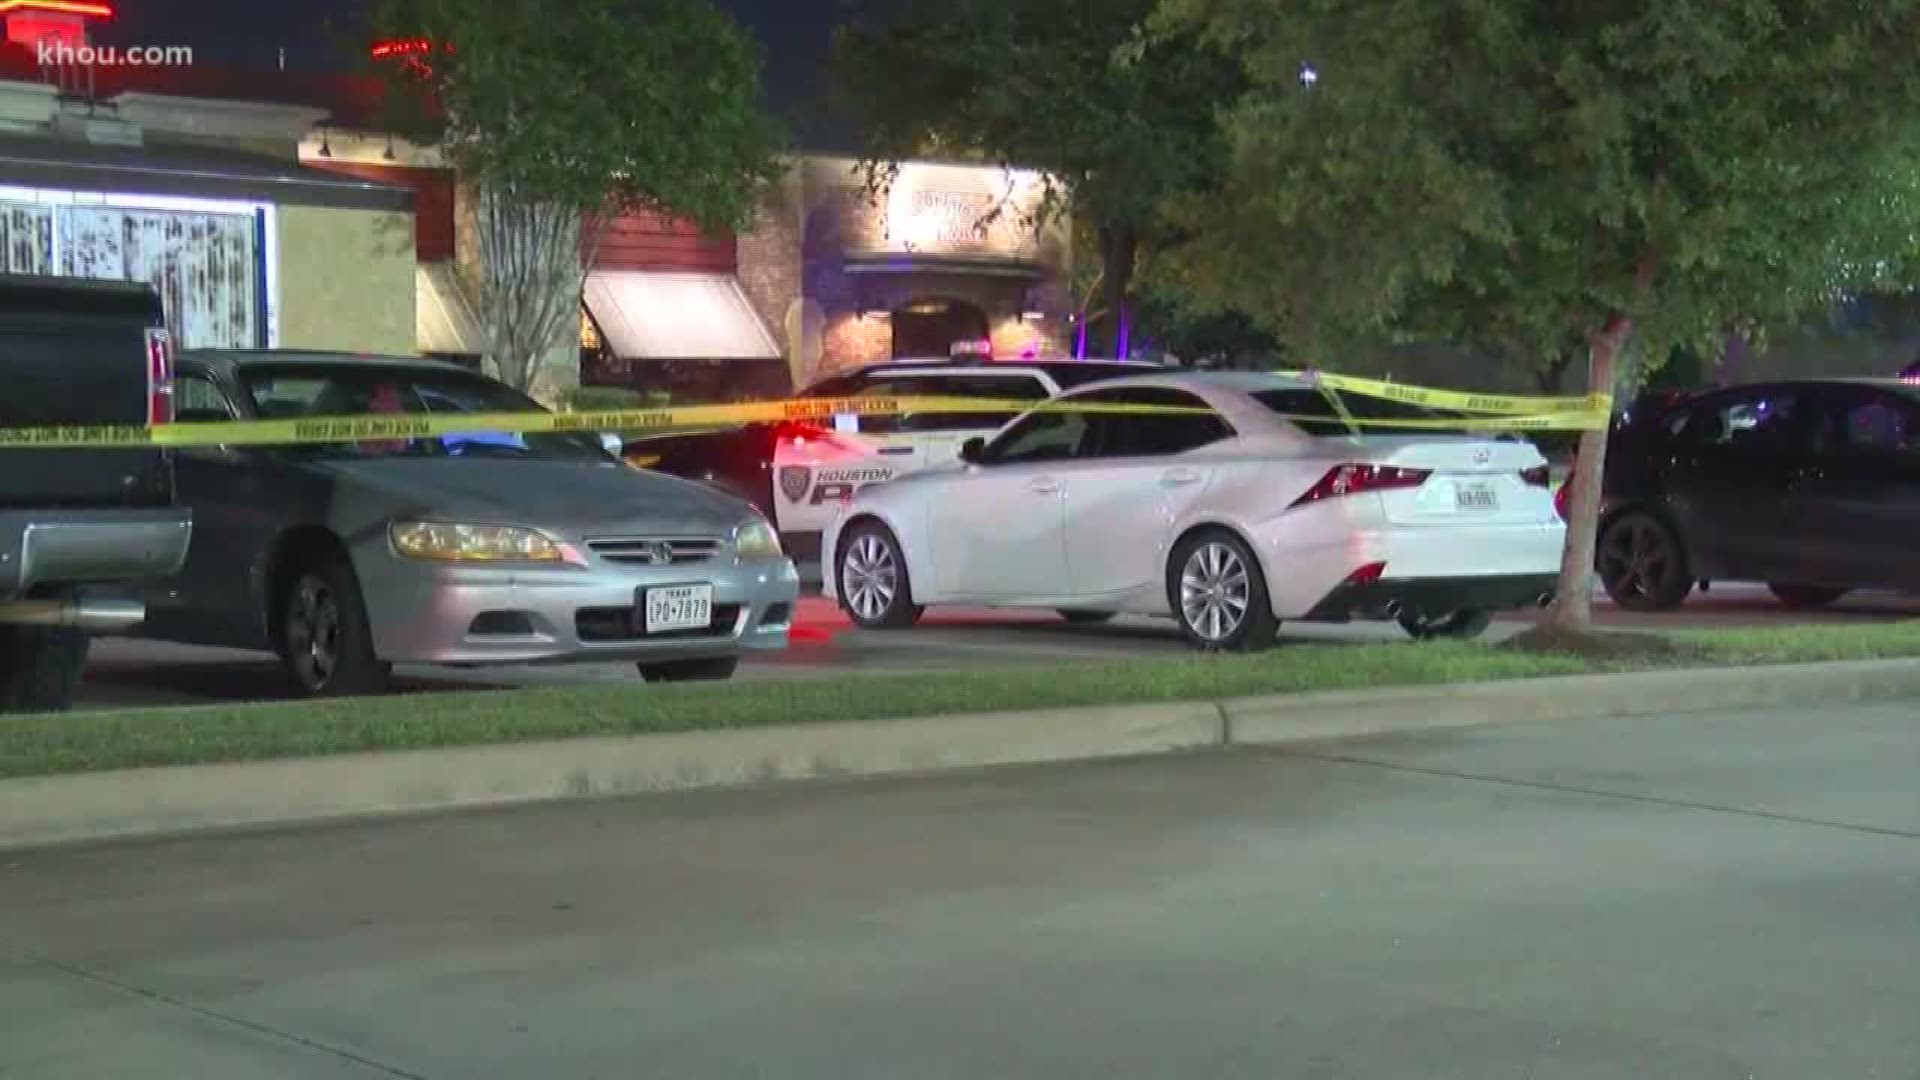 Houston Police say an off-duty deputy was targeted in an attempted robbery Tuesday night in the Willowbrook area.